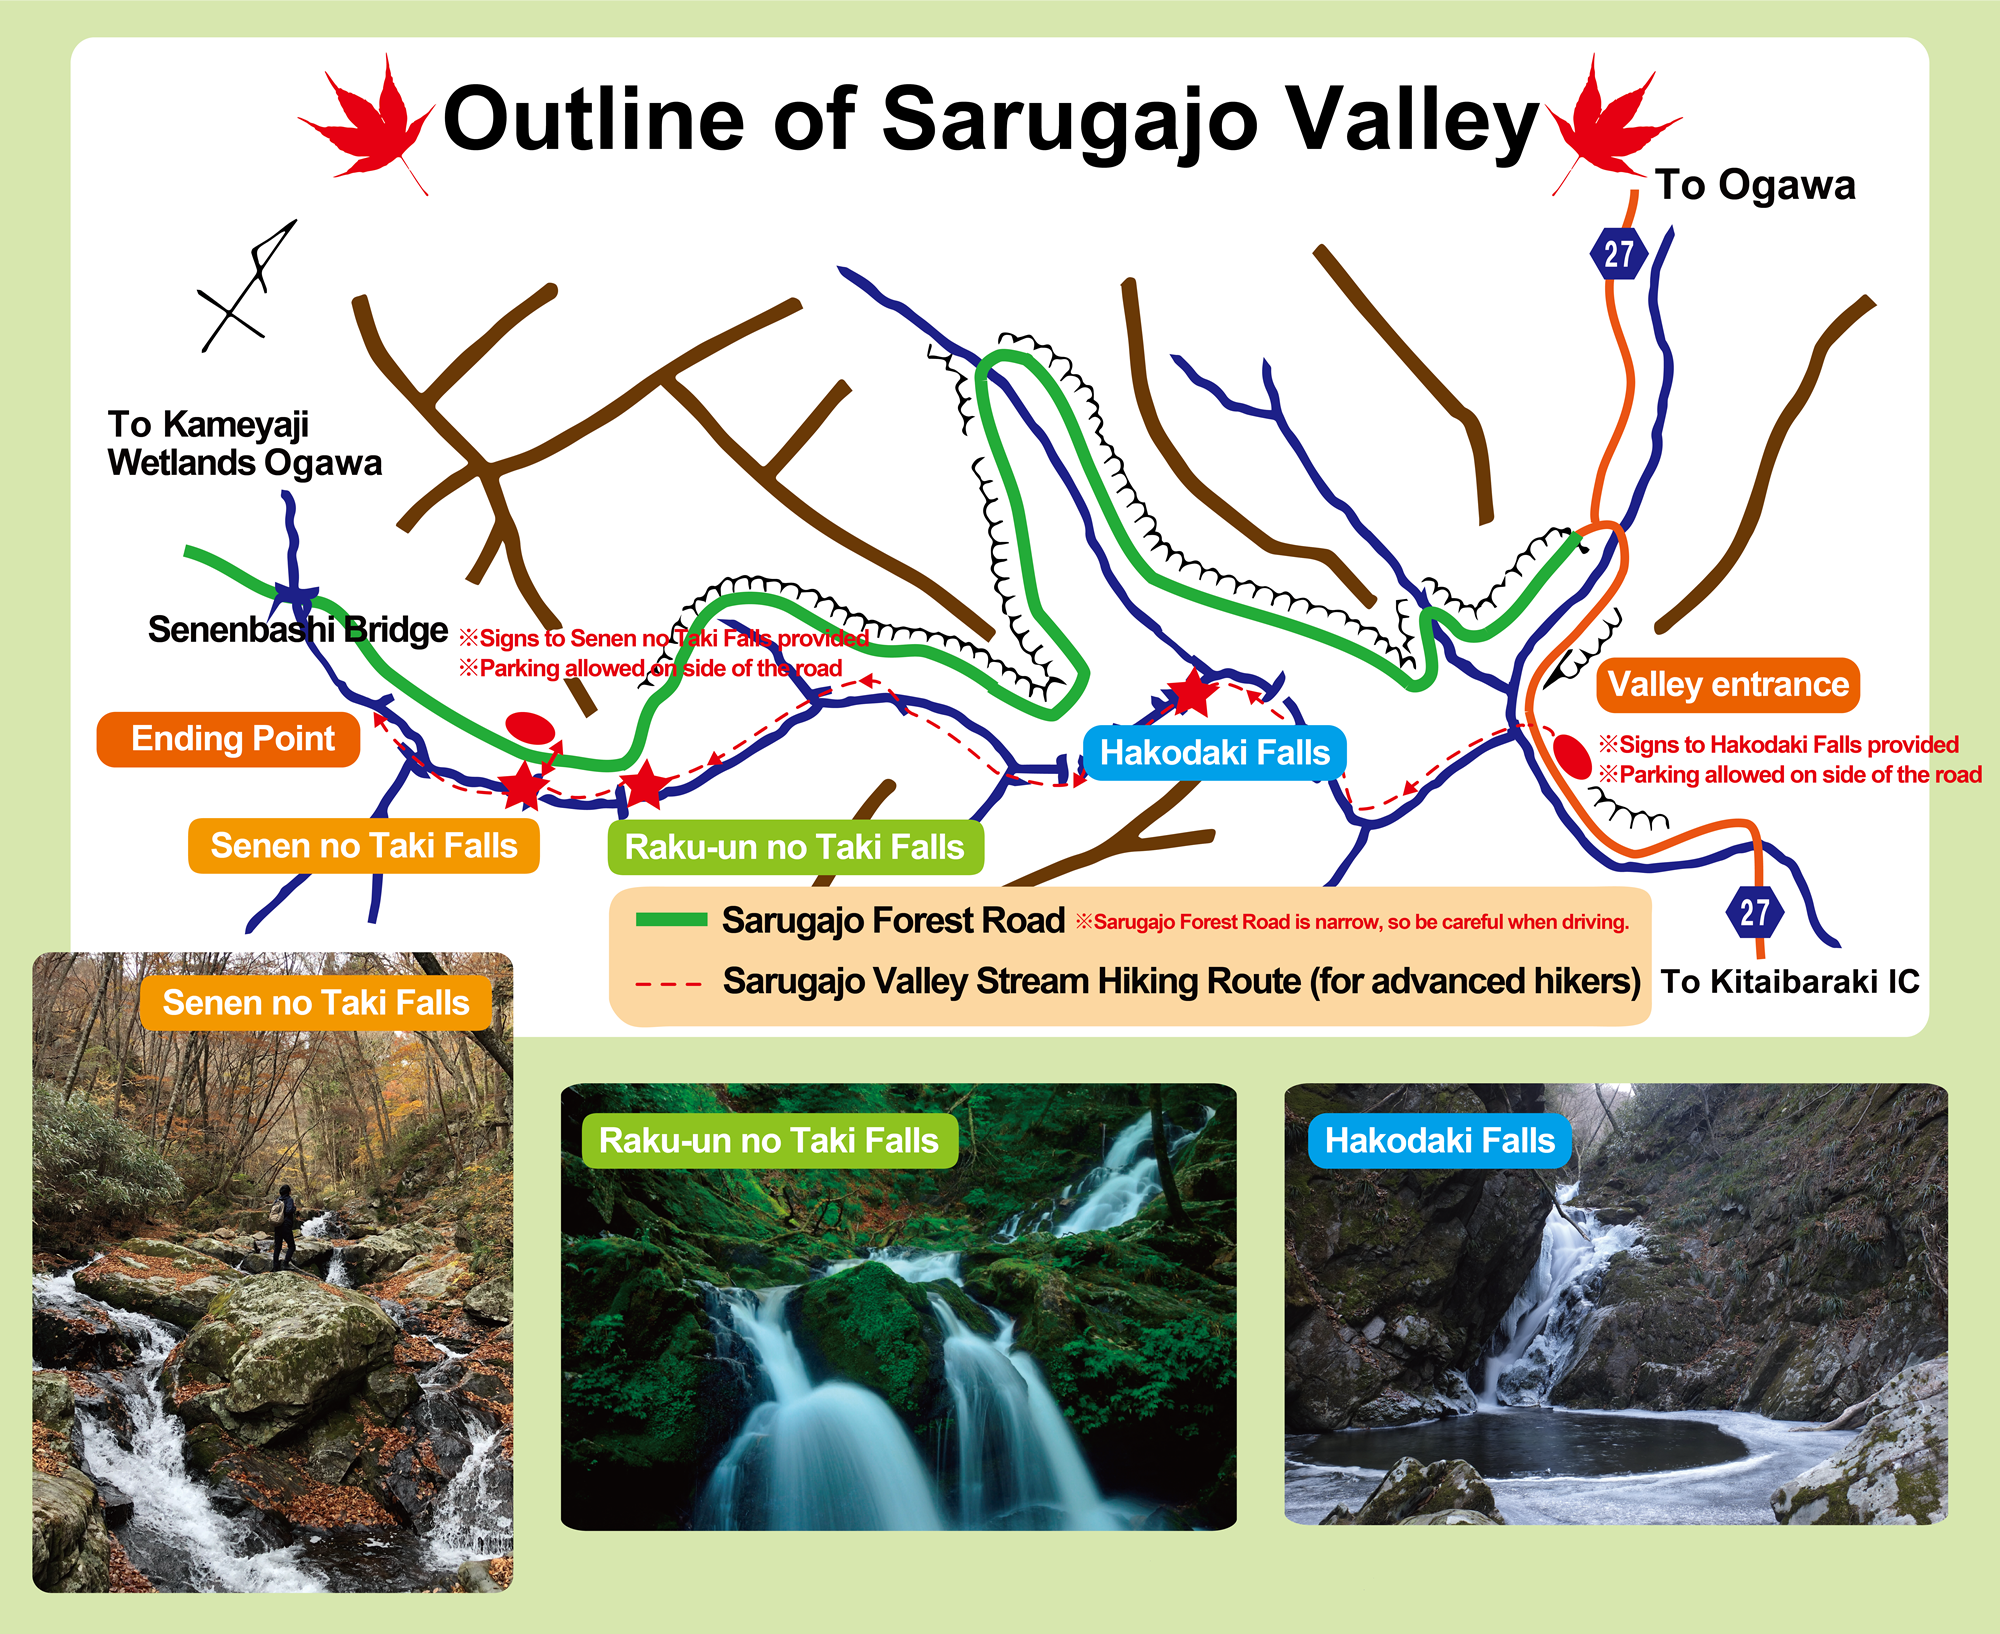 『Outline of Sarugajo Valley』の画像